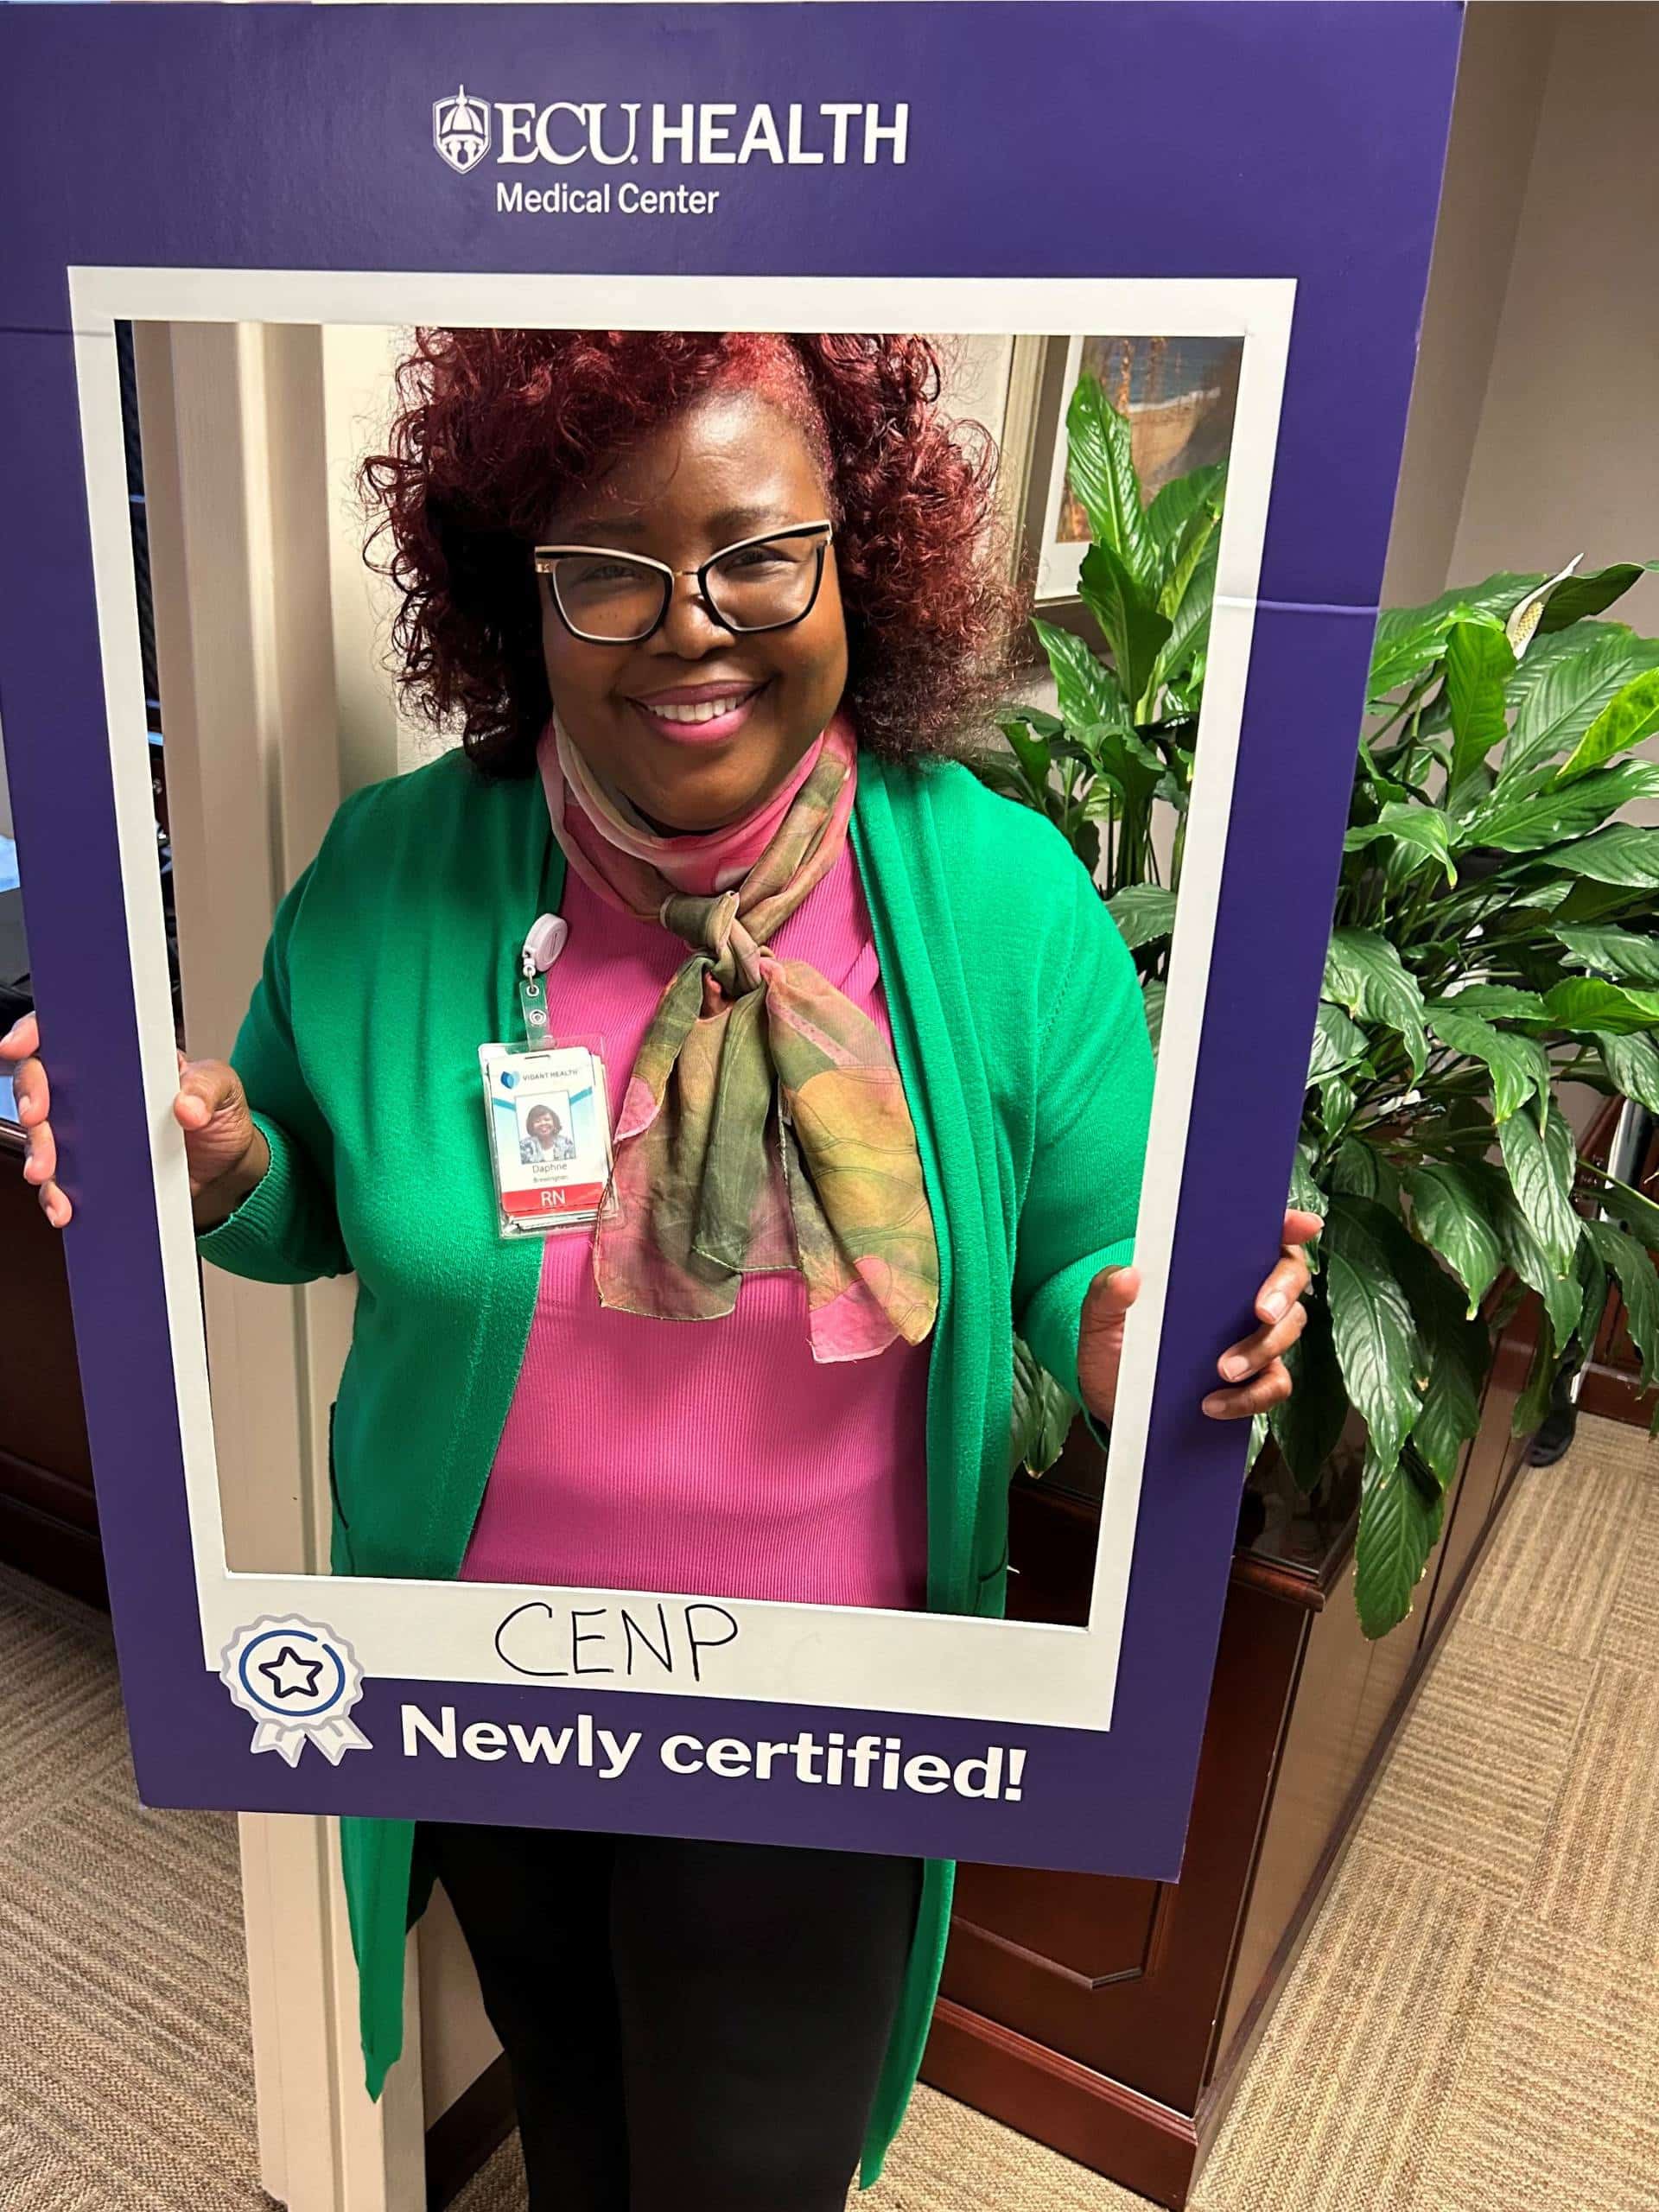 Dr. Brewington, Senior Vice President of ECU Health medical center poses as she receives her specialty certification